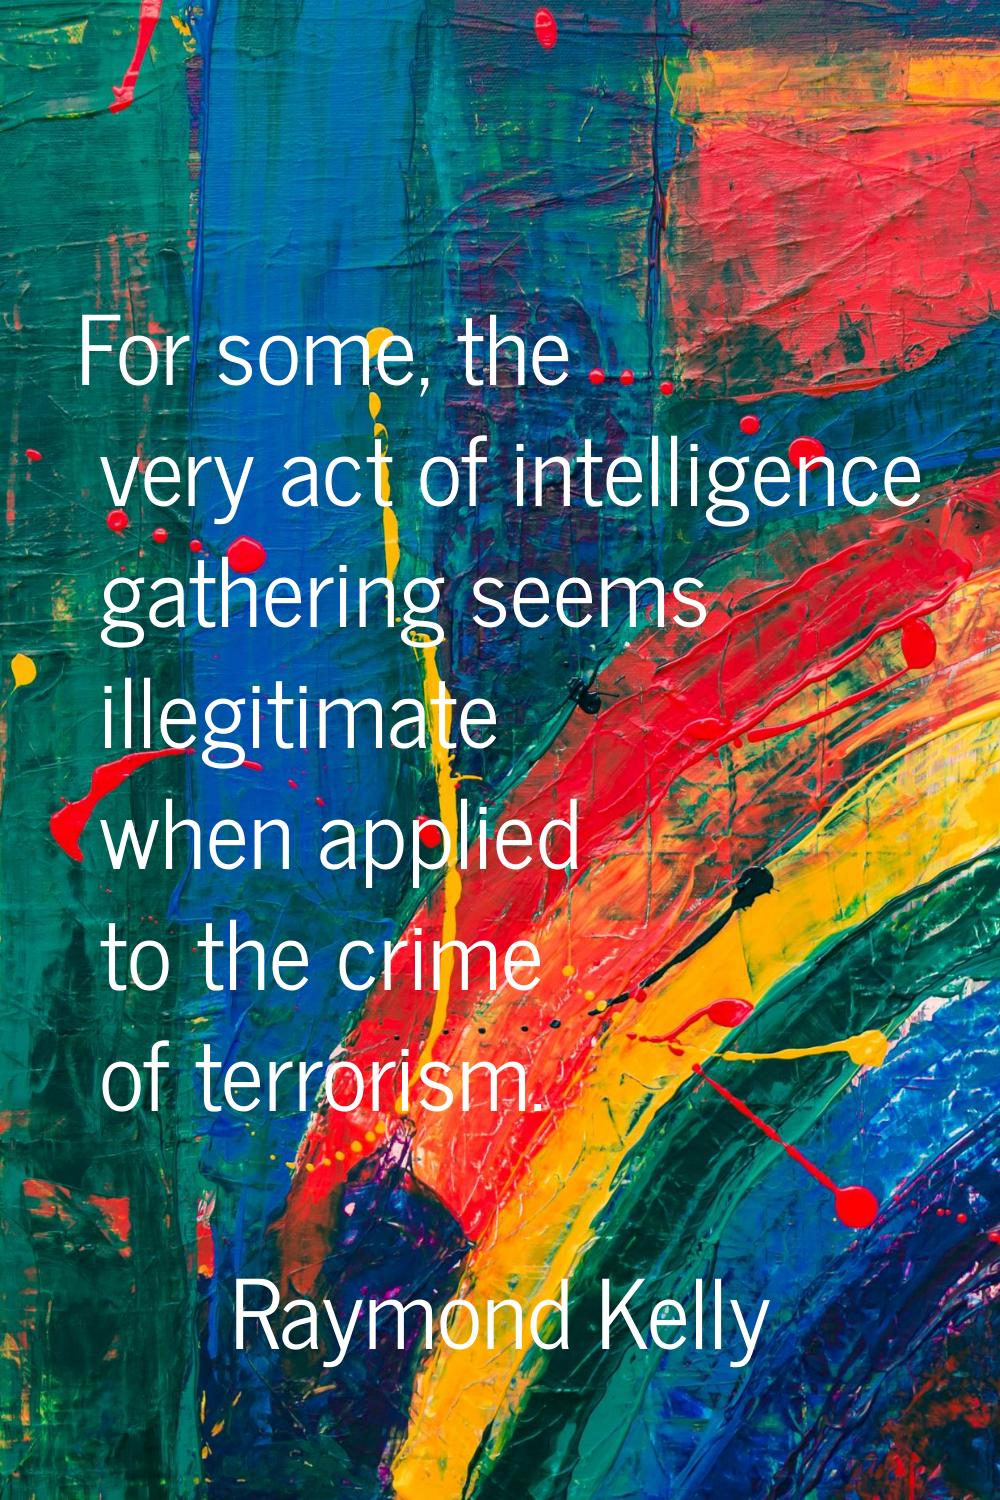 For some, the very act of intelligence gathering seems illegitimate when applied to the crime of te